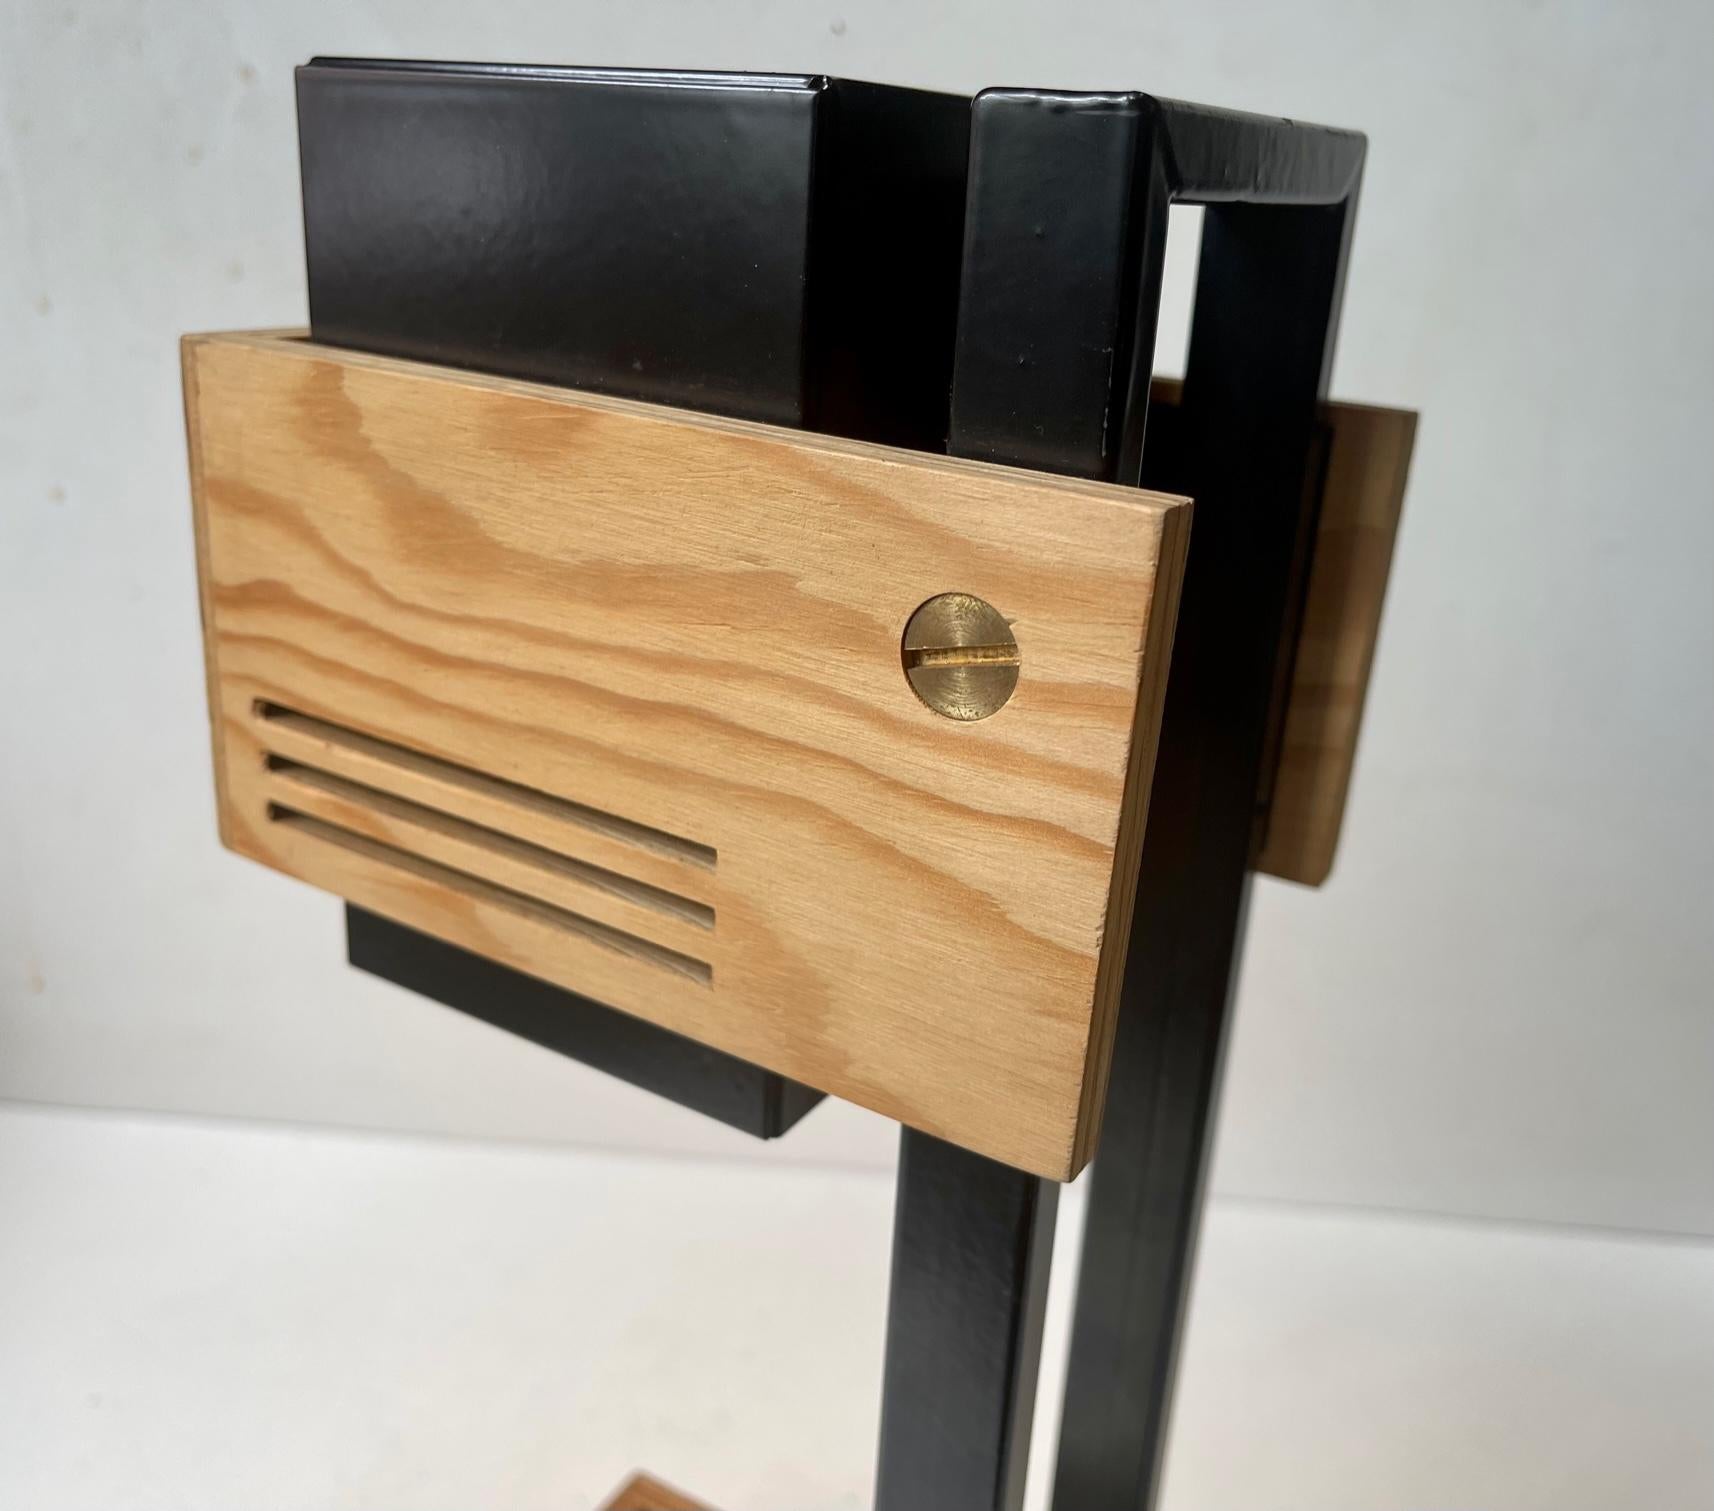 Danish Claus Bolby Cubist Table Lamp in Plywood and Steel for Cebo Industri, 1970s For Sale